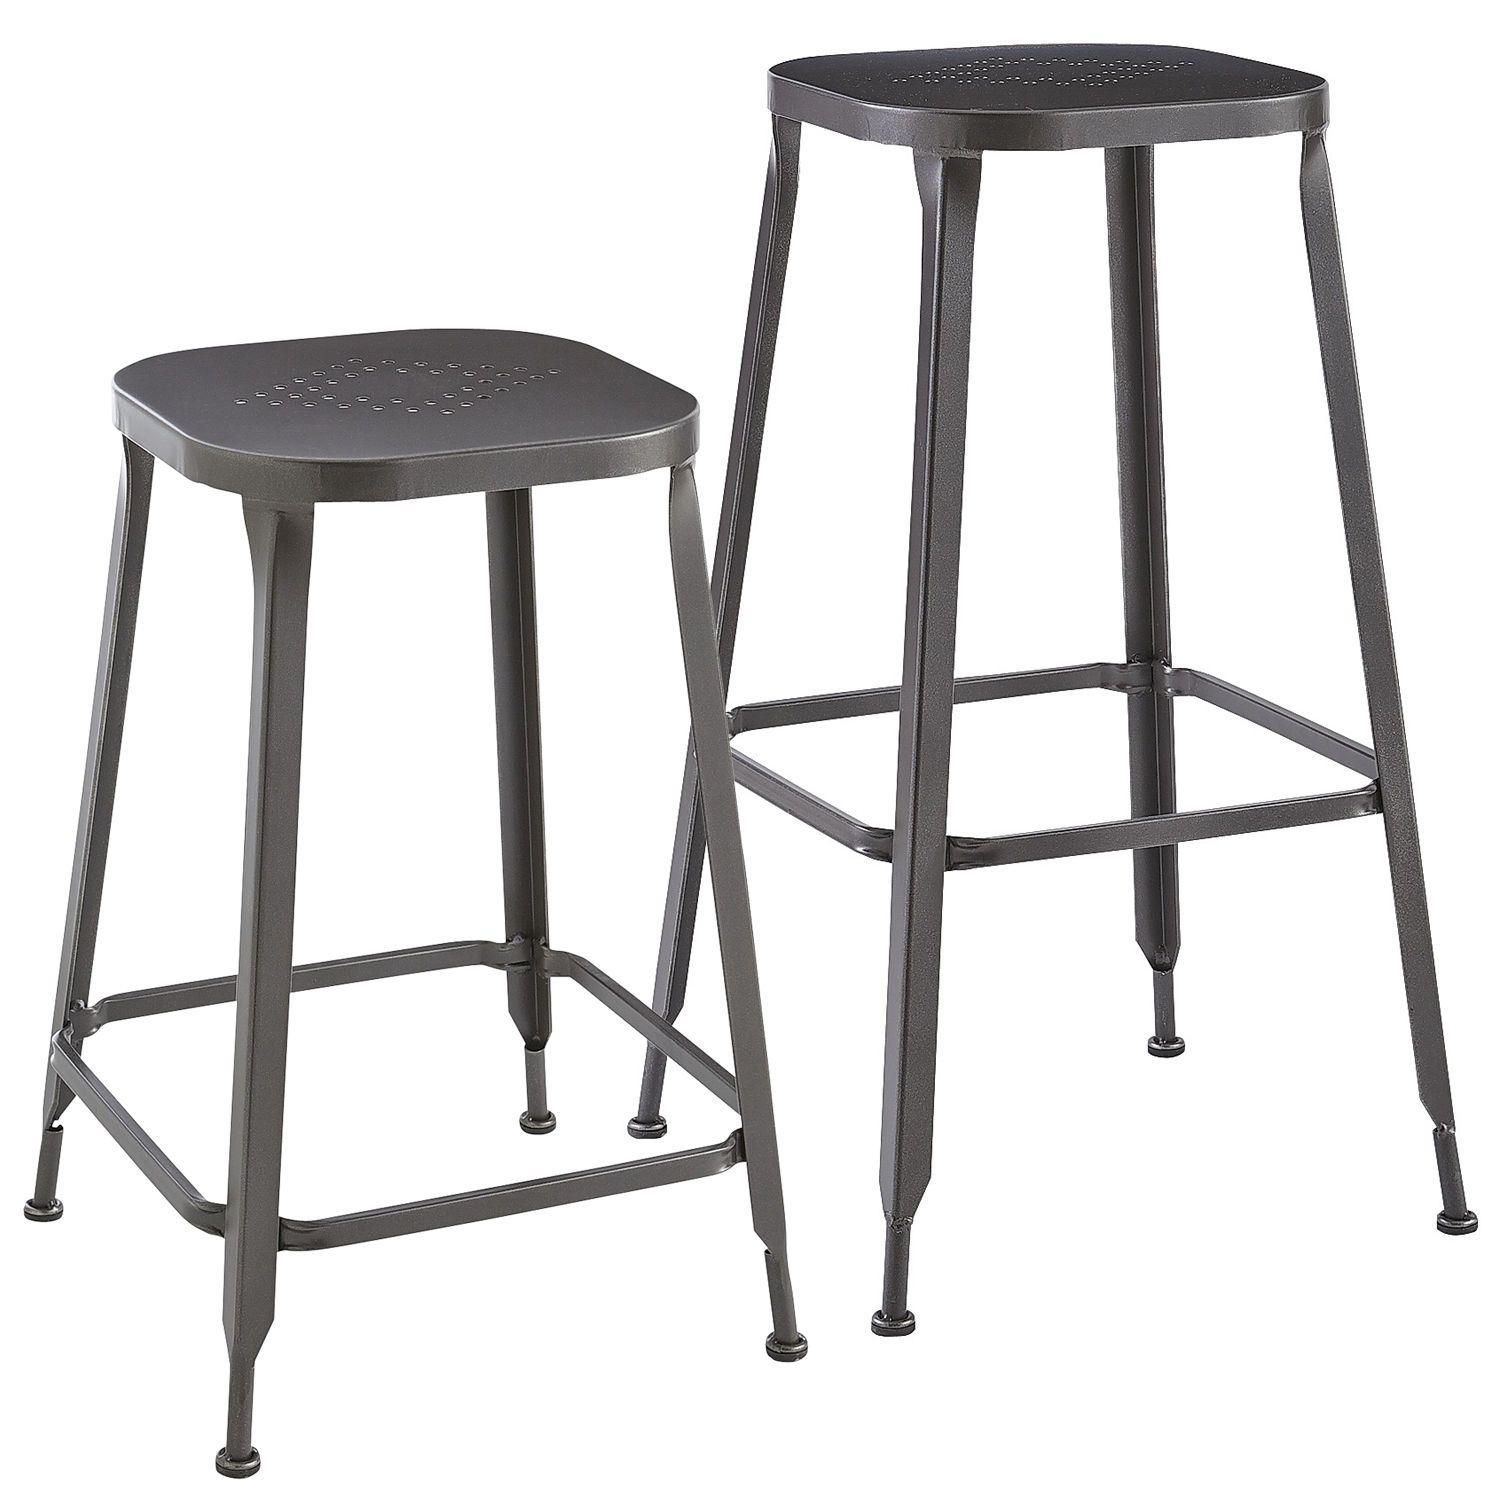 pier one bar stool covers